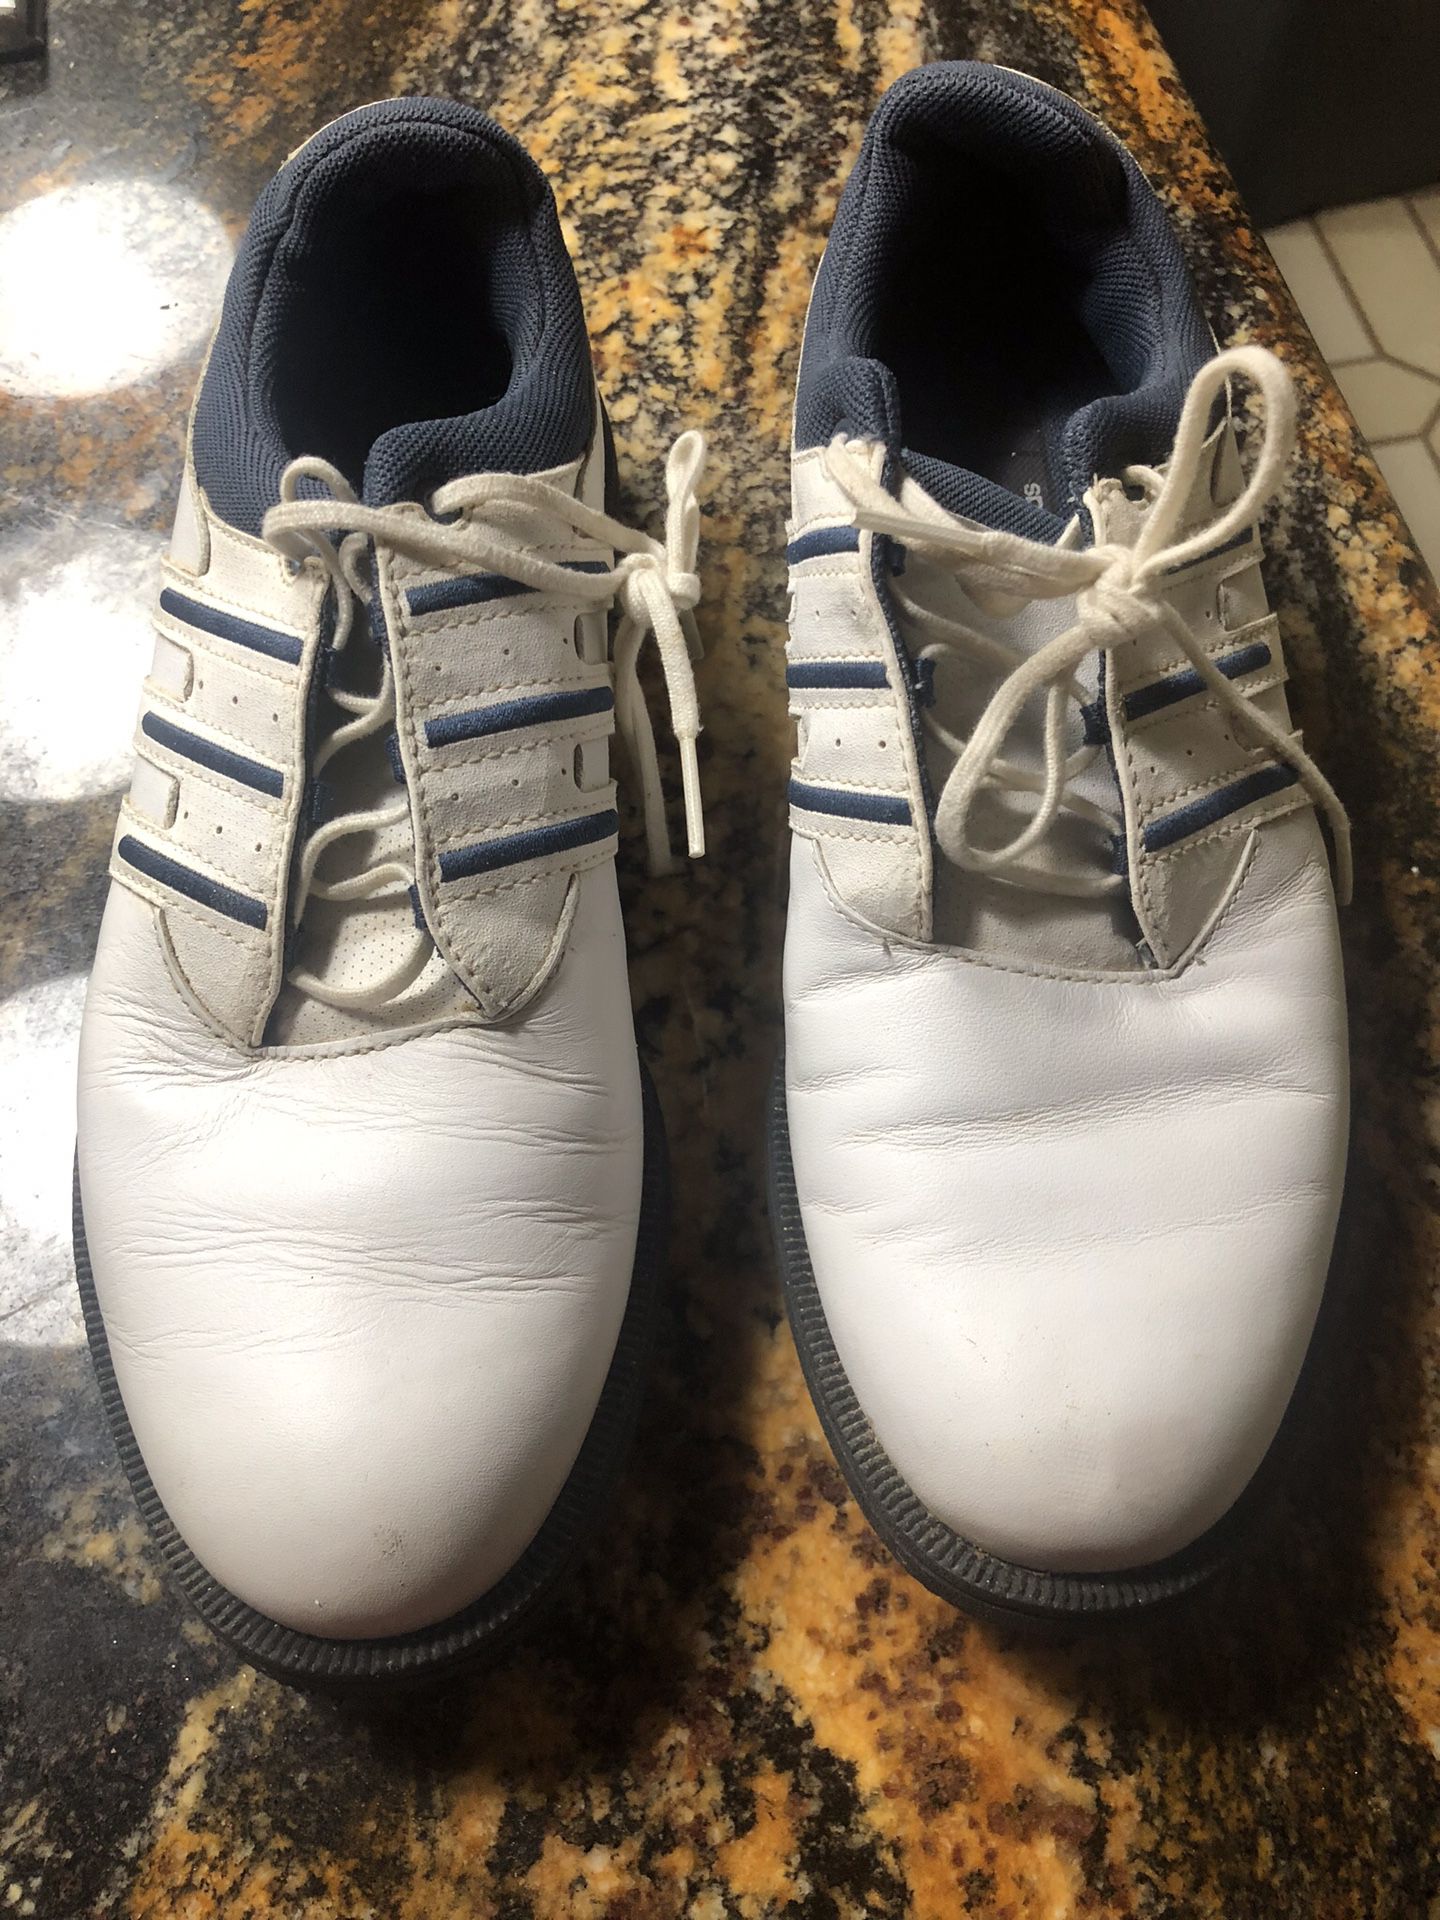 Adidas Womens Traxion Leather Golf Shoes US Size 7